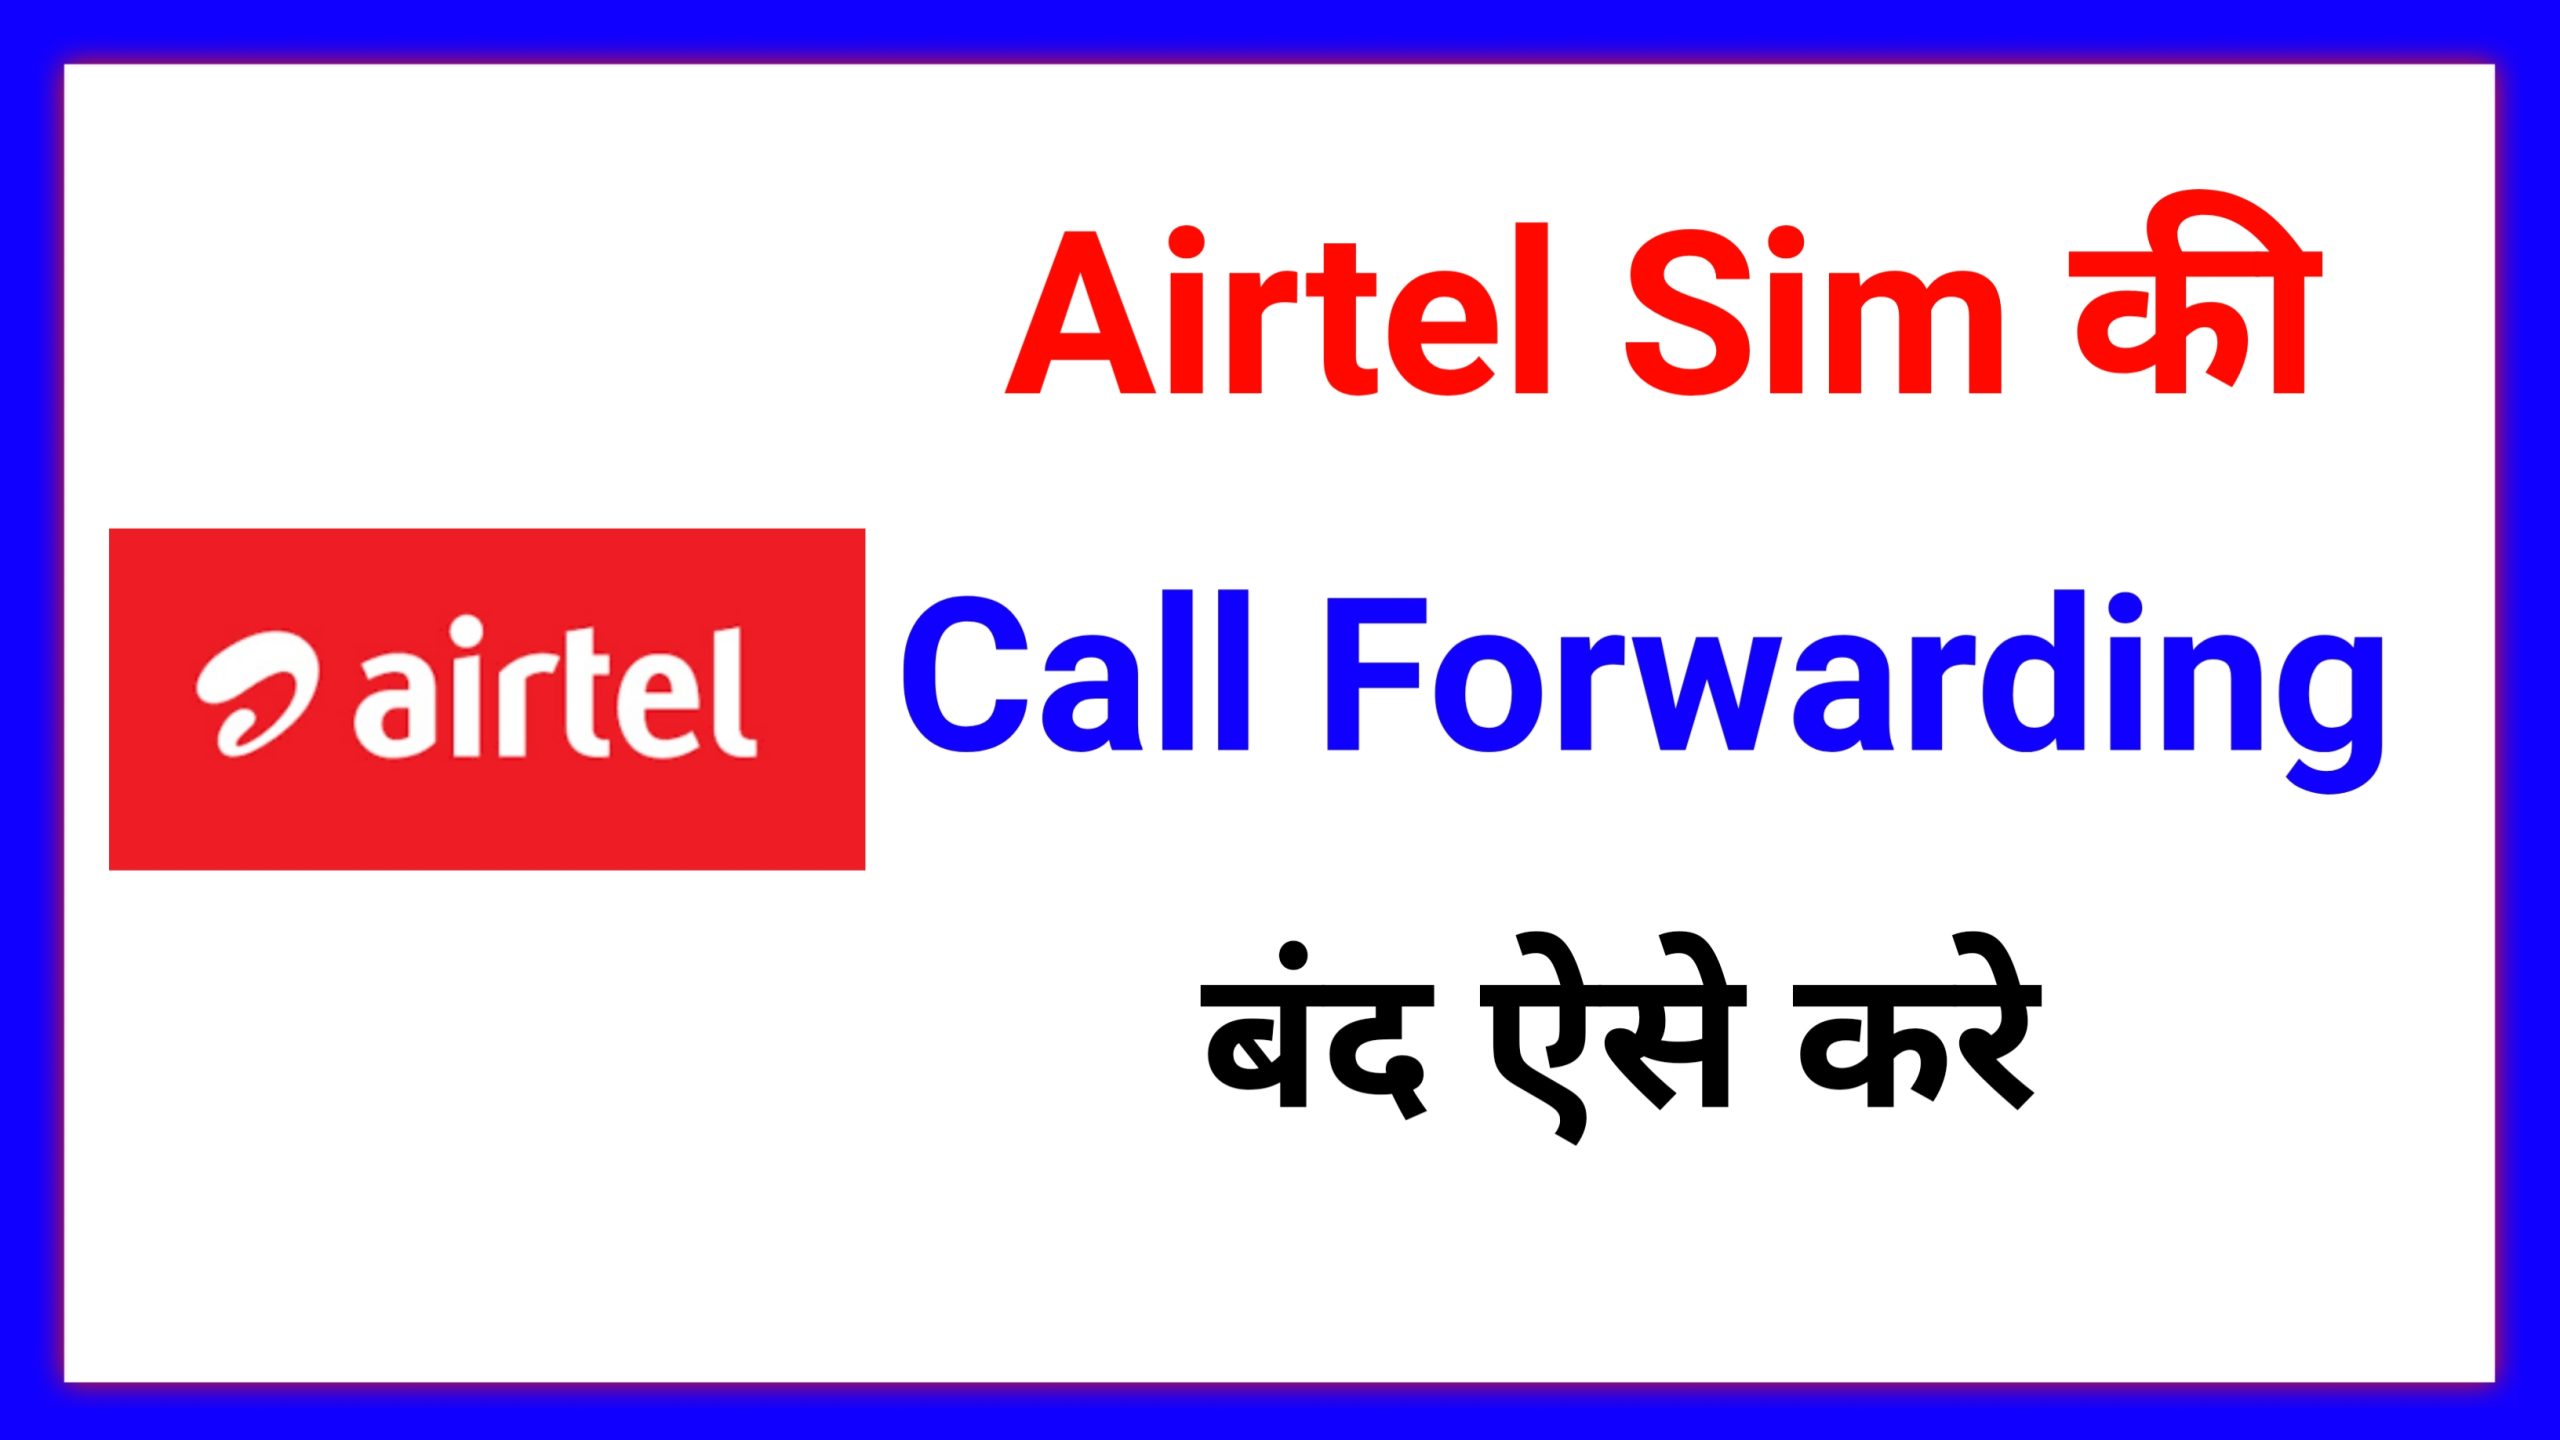 How to Stop Call Forwarding in Airtel SIM | Airtel sim me Call Forwarding Band Kaise Kare